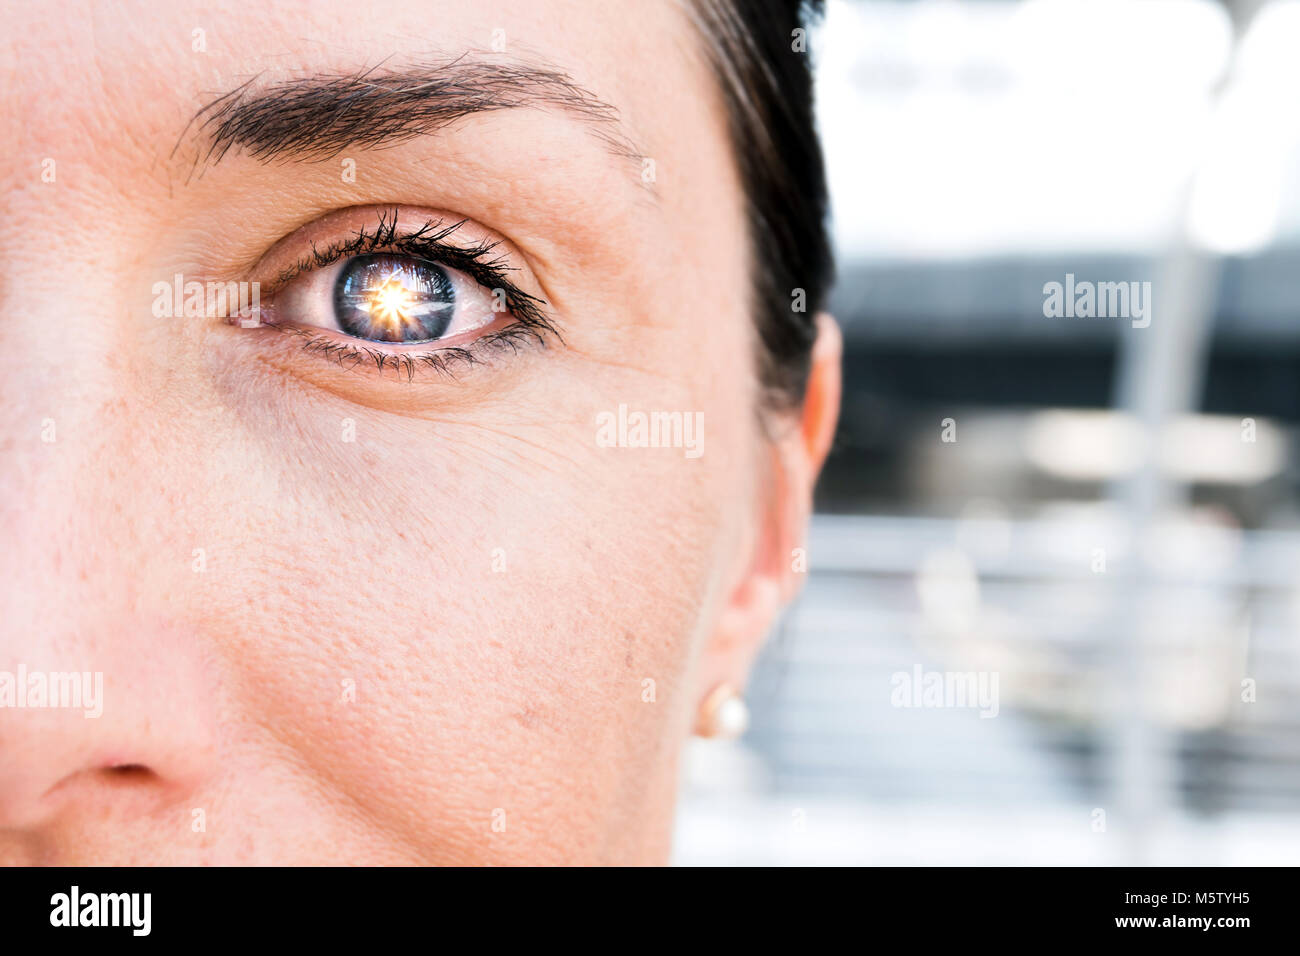 Artificial intelligence , deep learning technology trend concept. AI learns to detect diabetic eye disease. Stock Photo